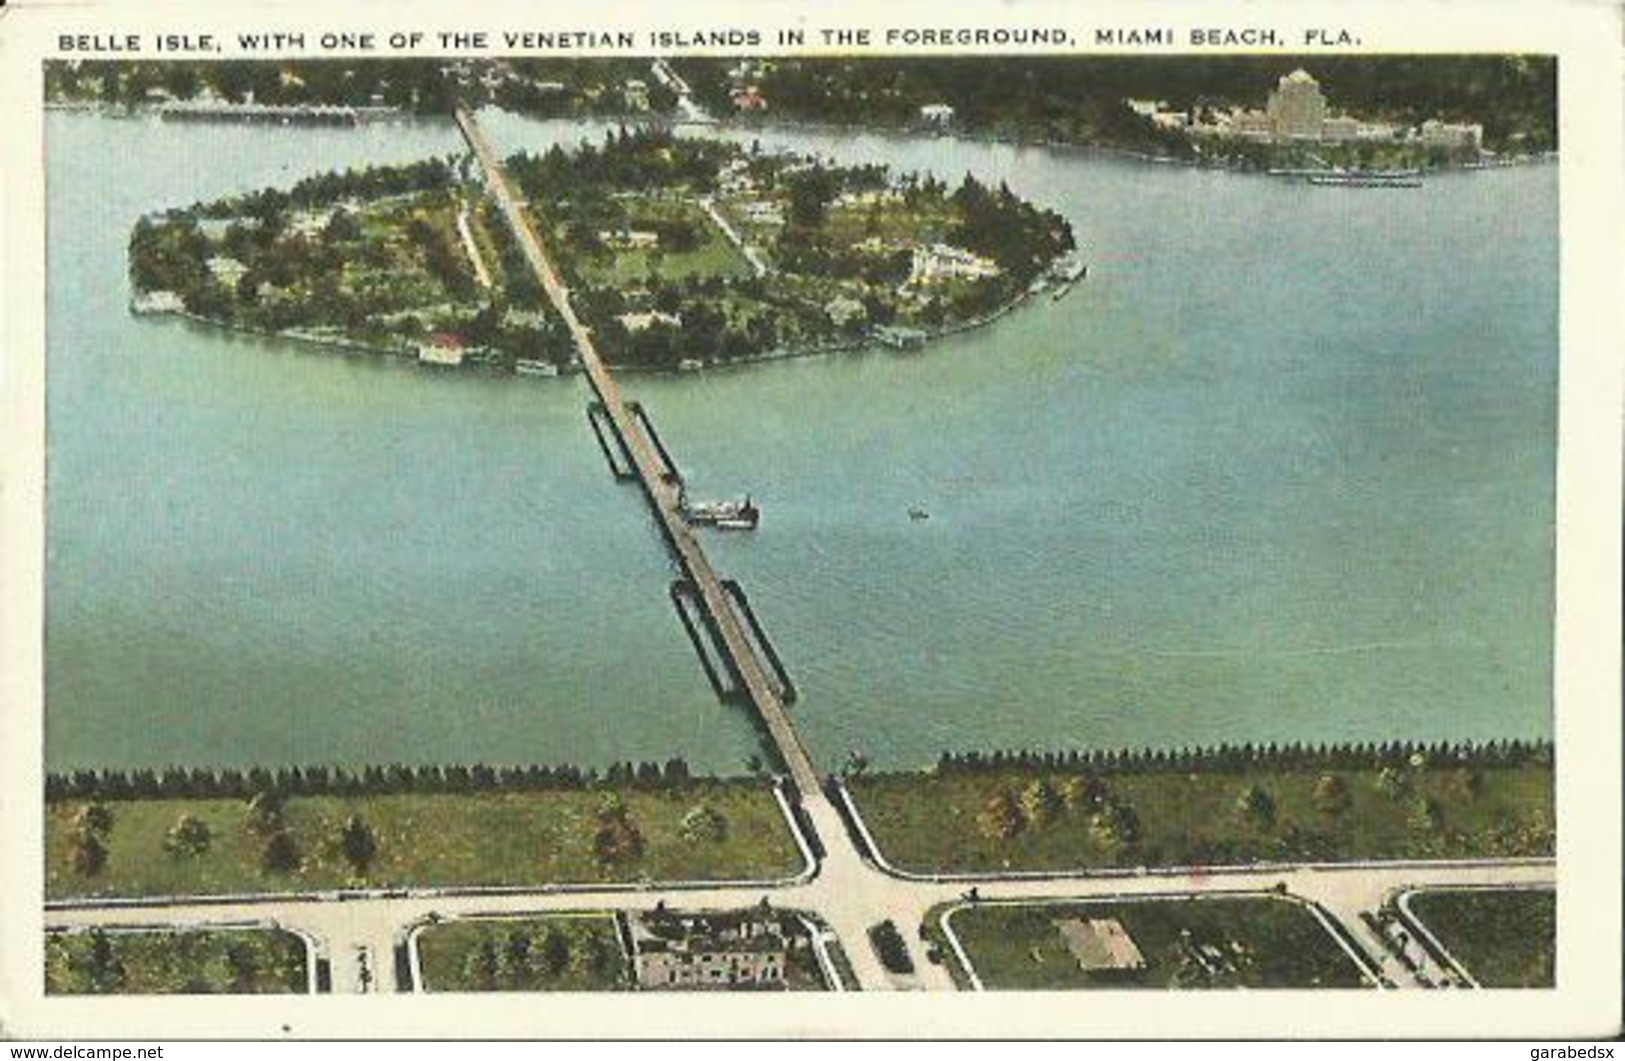 Belle Isle, With One Of The Venetian Islands In The Foreground, Miami Beach, FLA. - Miami Beach